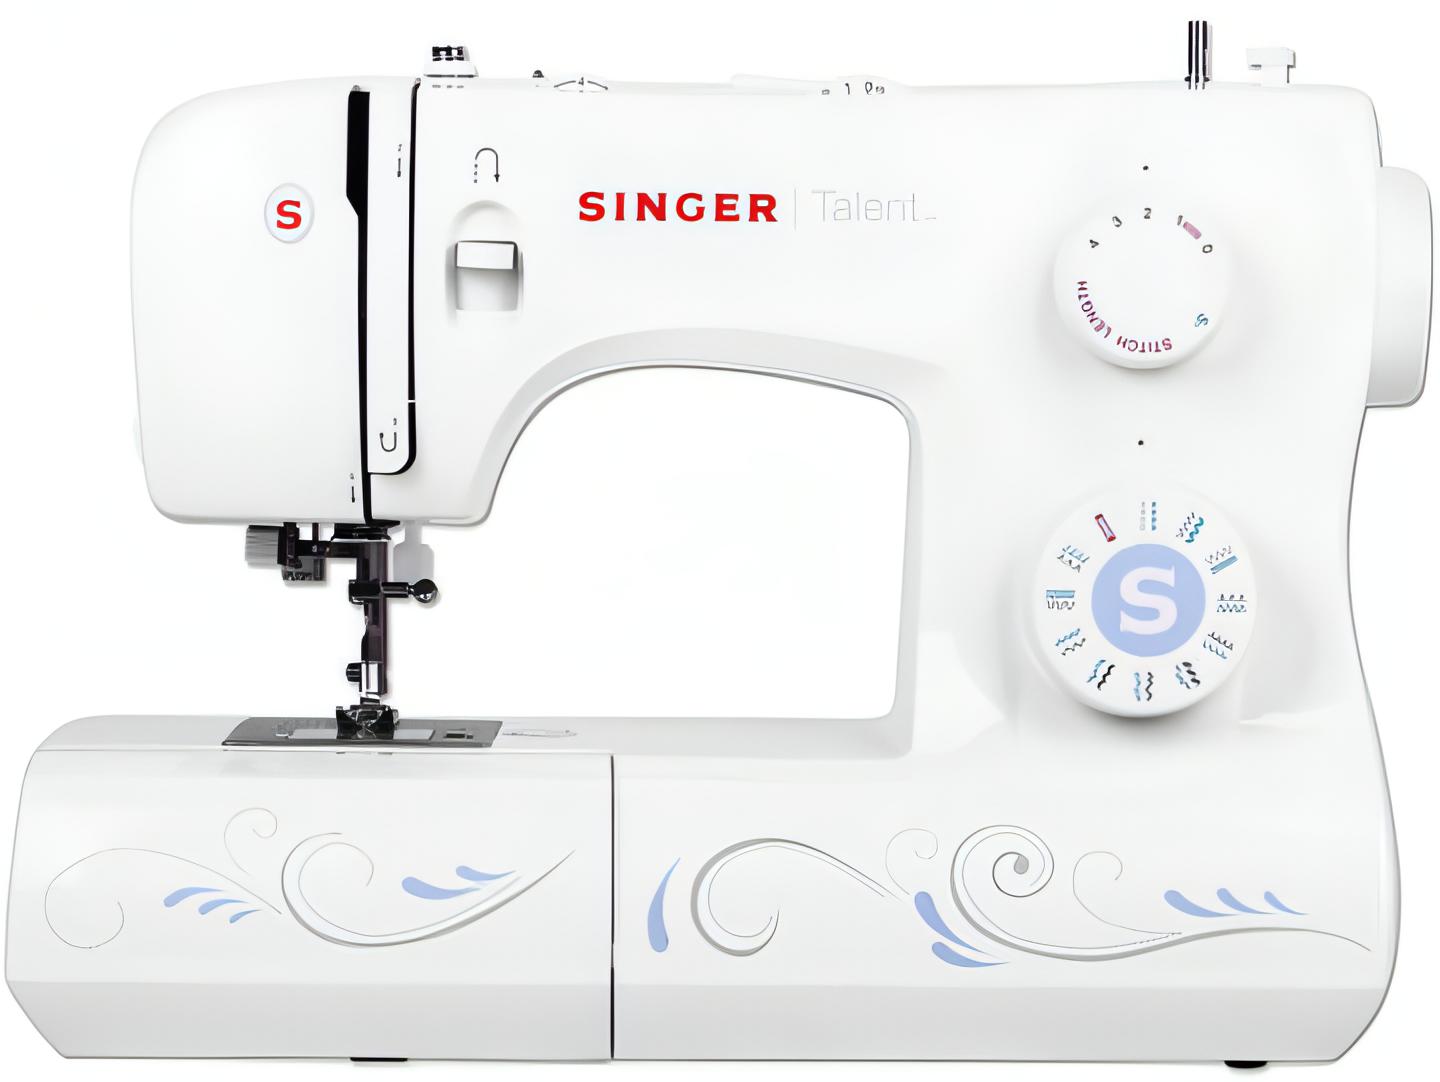 Singer Talent 3323 (Drop-in Bobbin) 23 stitch patterns, Ex Display - B grade may have signs of use or cosmetic marks